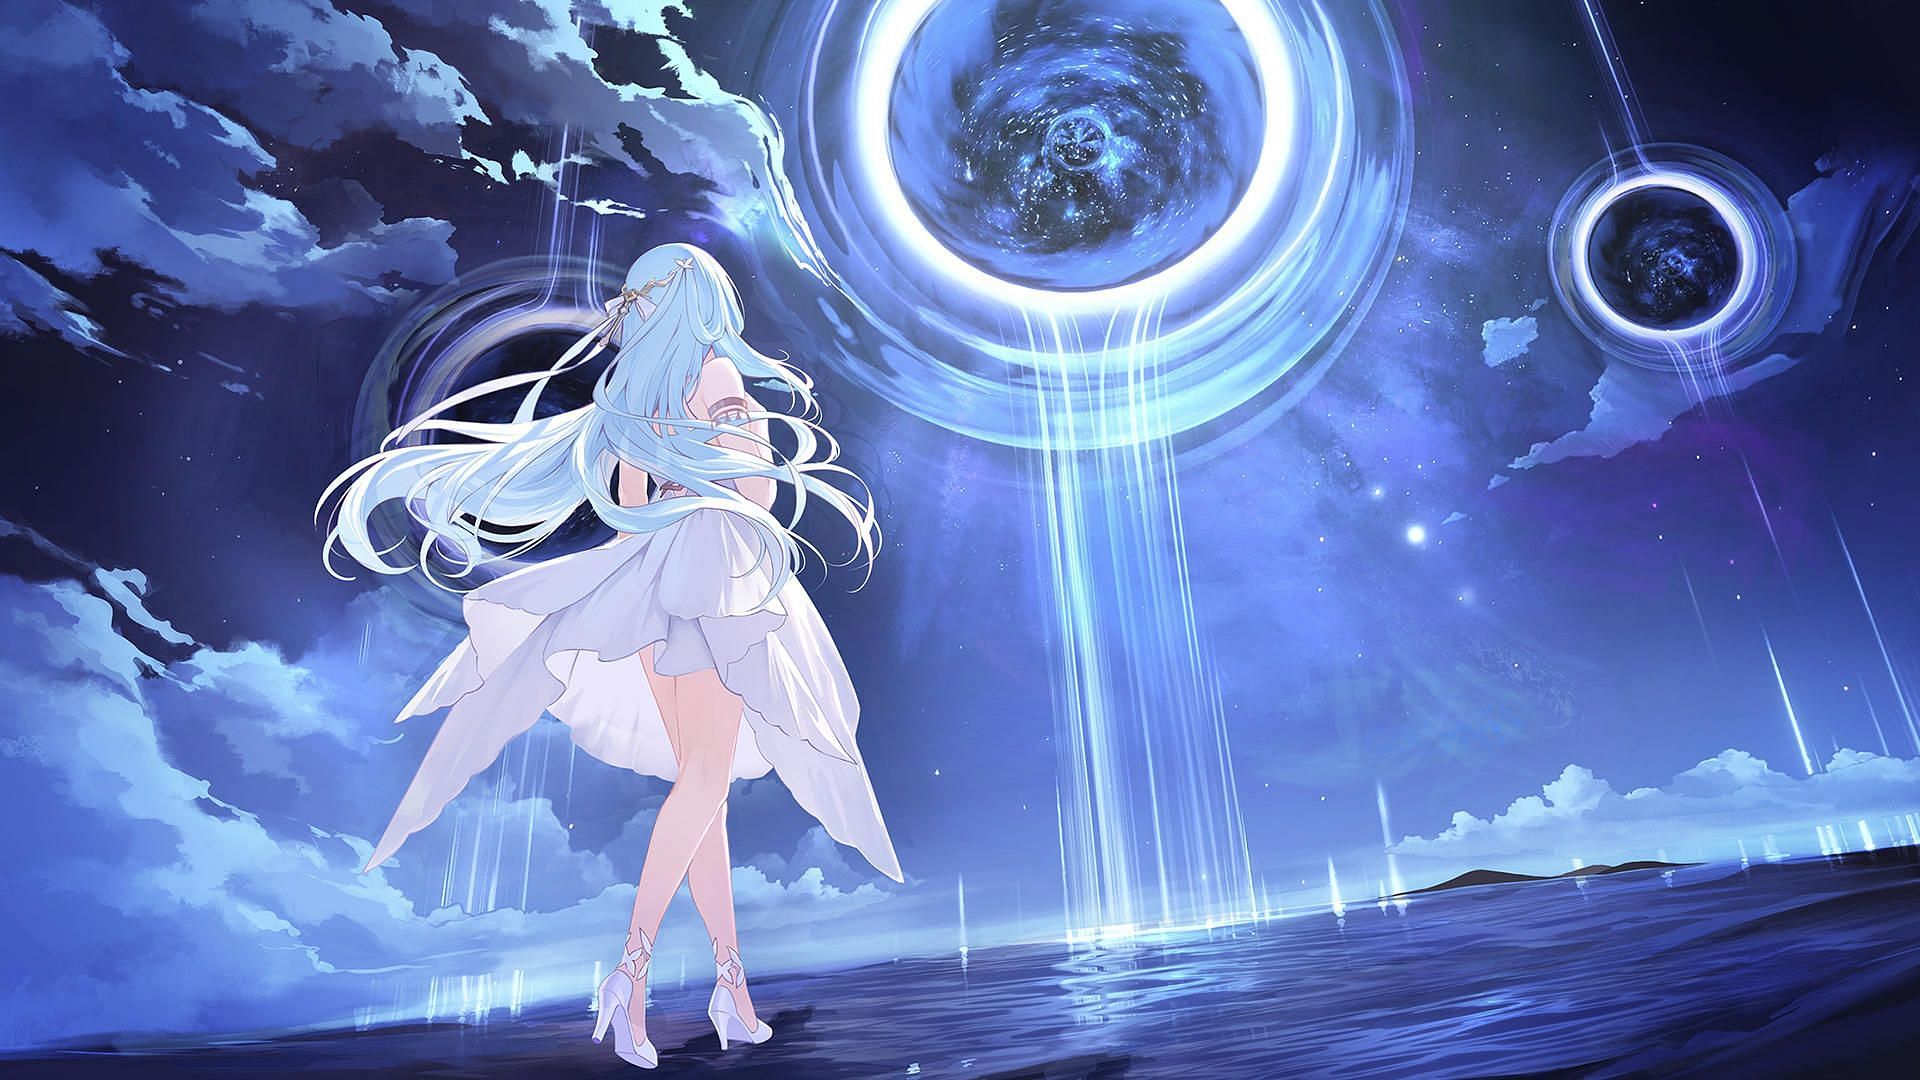 The game features an open-world design similar to that of Genshin Impact (Image via Manjuu)